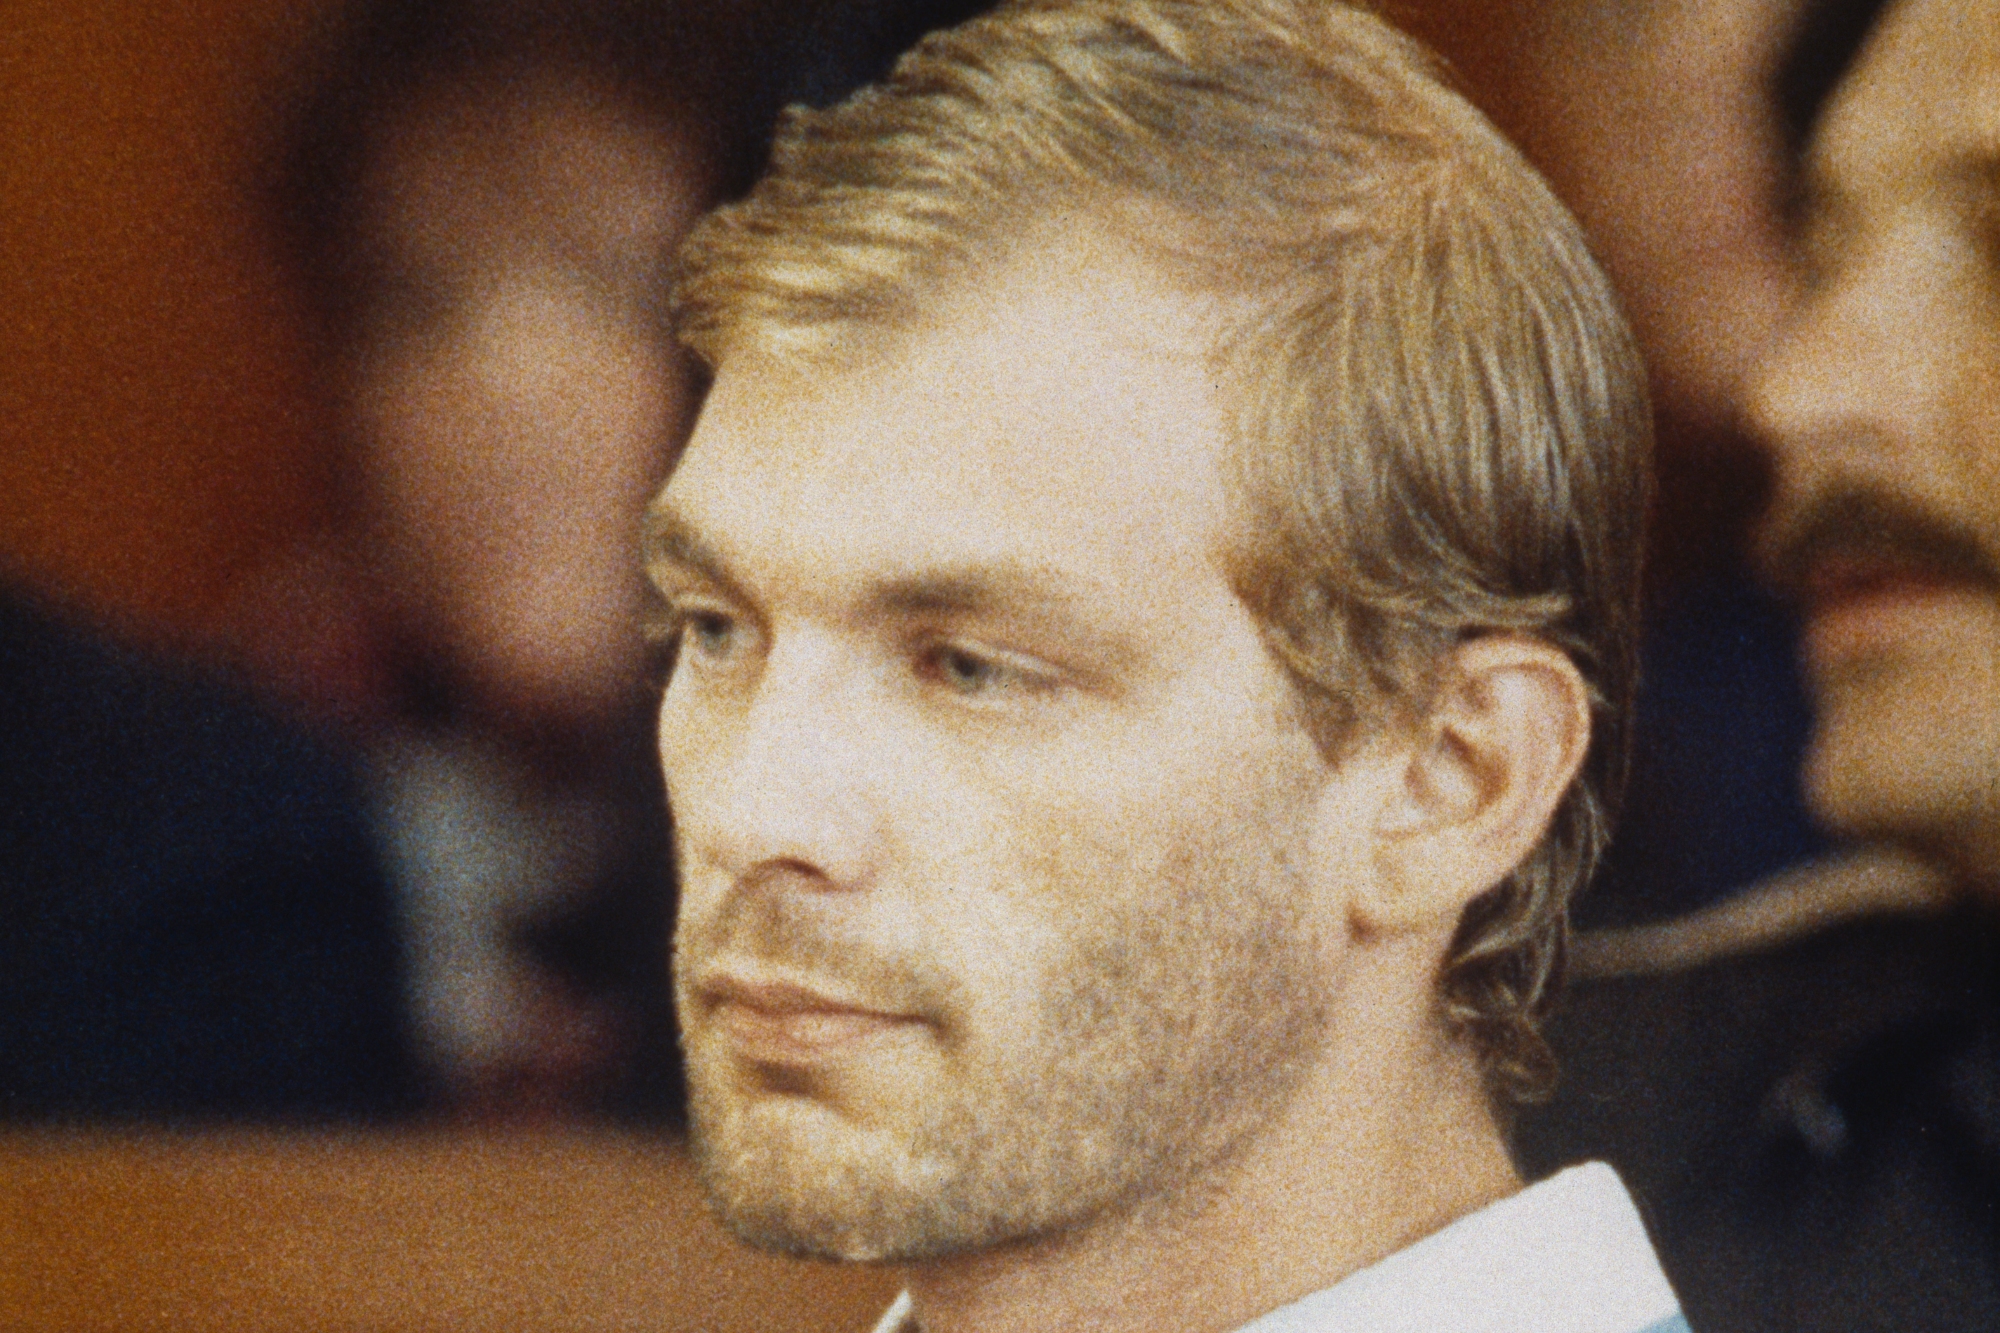 Jeffrey Dahmer Once Created His Own Secret ‘Private Cemetery’ out of ‘Adolescent Obsession’